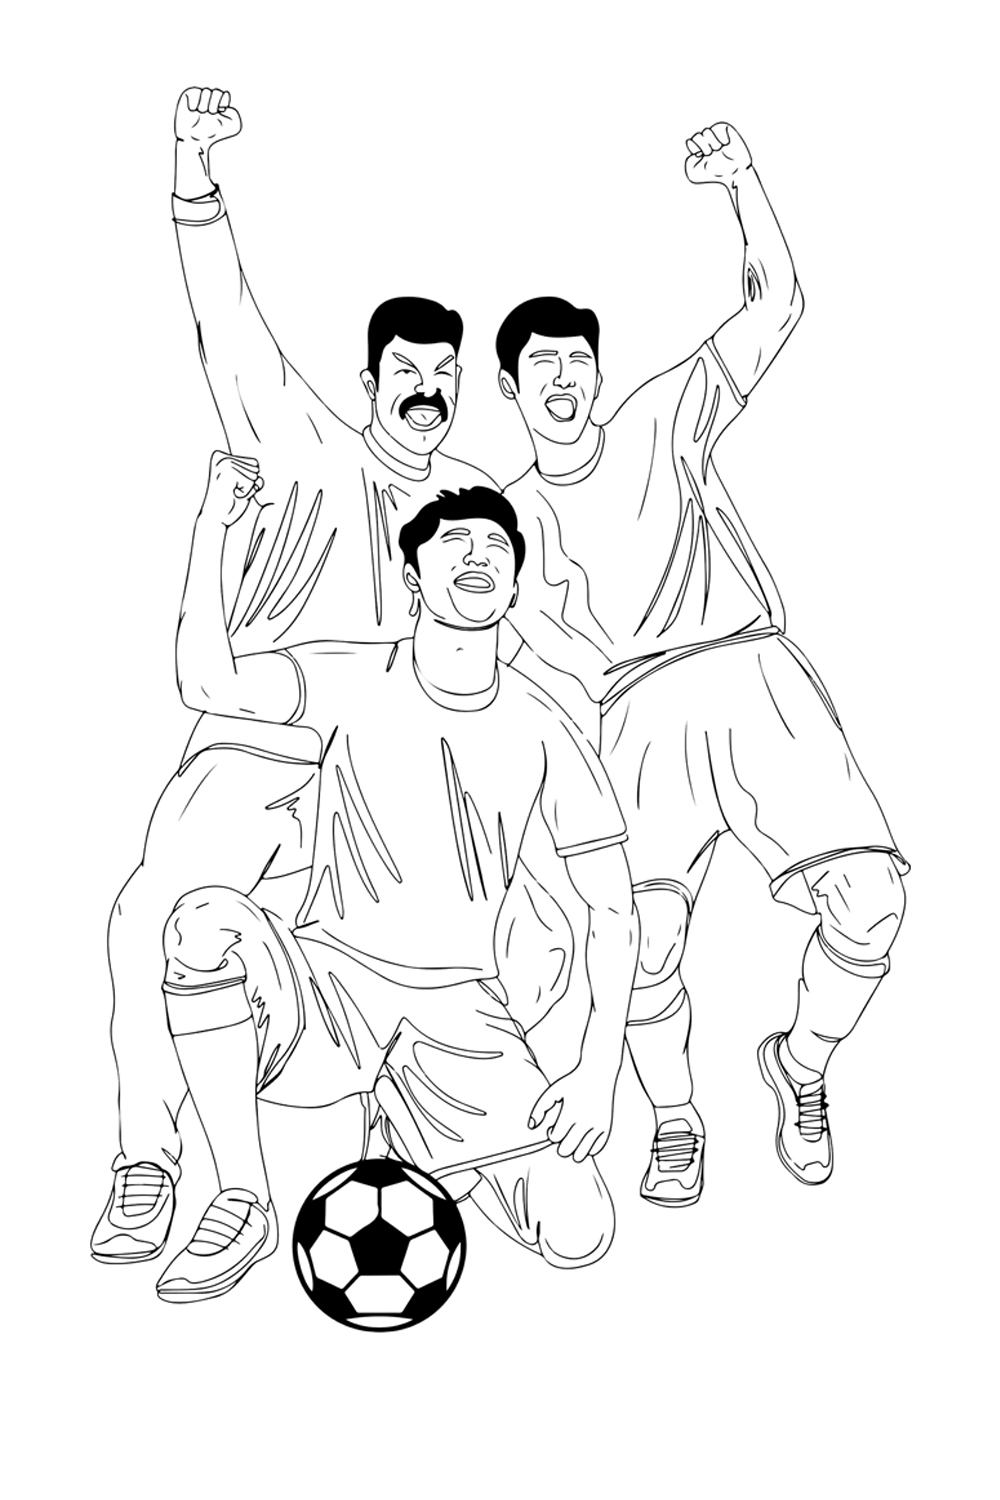 Cup-Winning Joy: Sketch Drawing of Football Team After Final Match, Winning Huddle: Rugby/American Football Team Celebrating Victory, Football Team Celebrating After Final Match pinterest preview image.